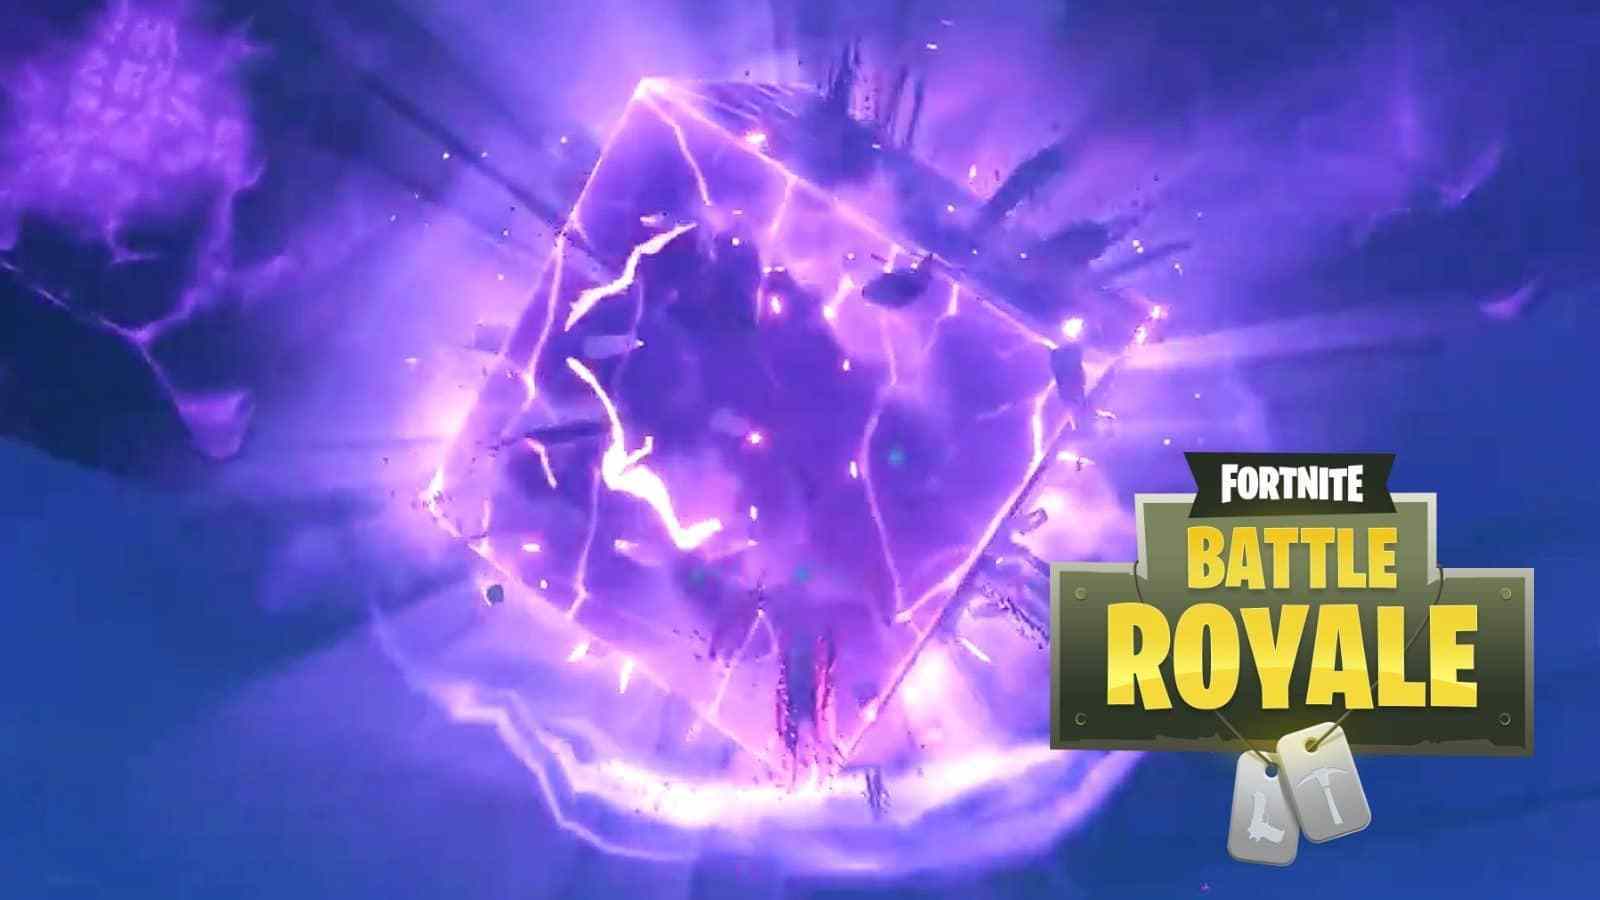 Fortnite's Kevin the Cube is no longer available